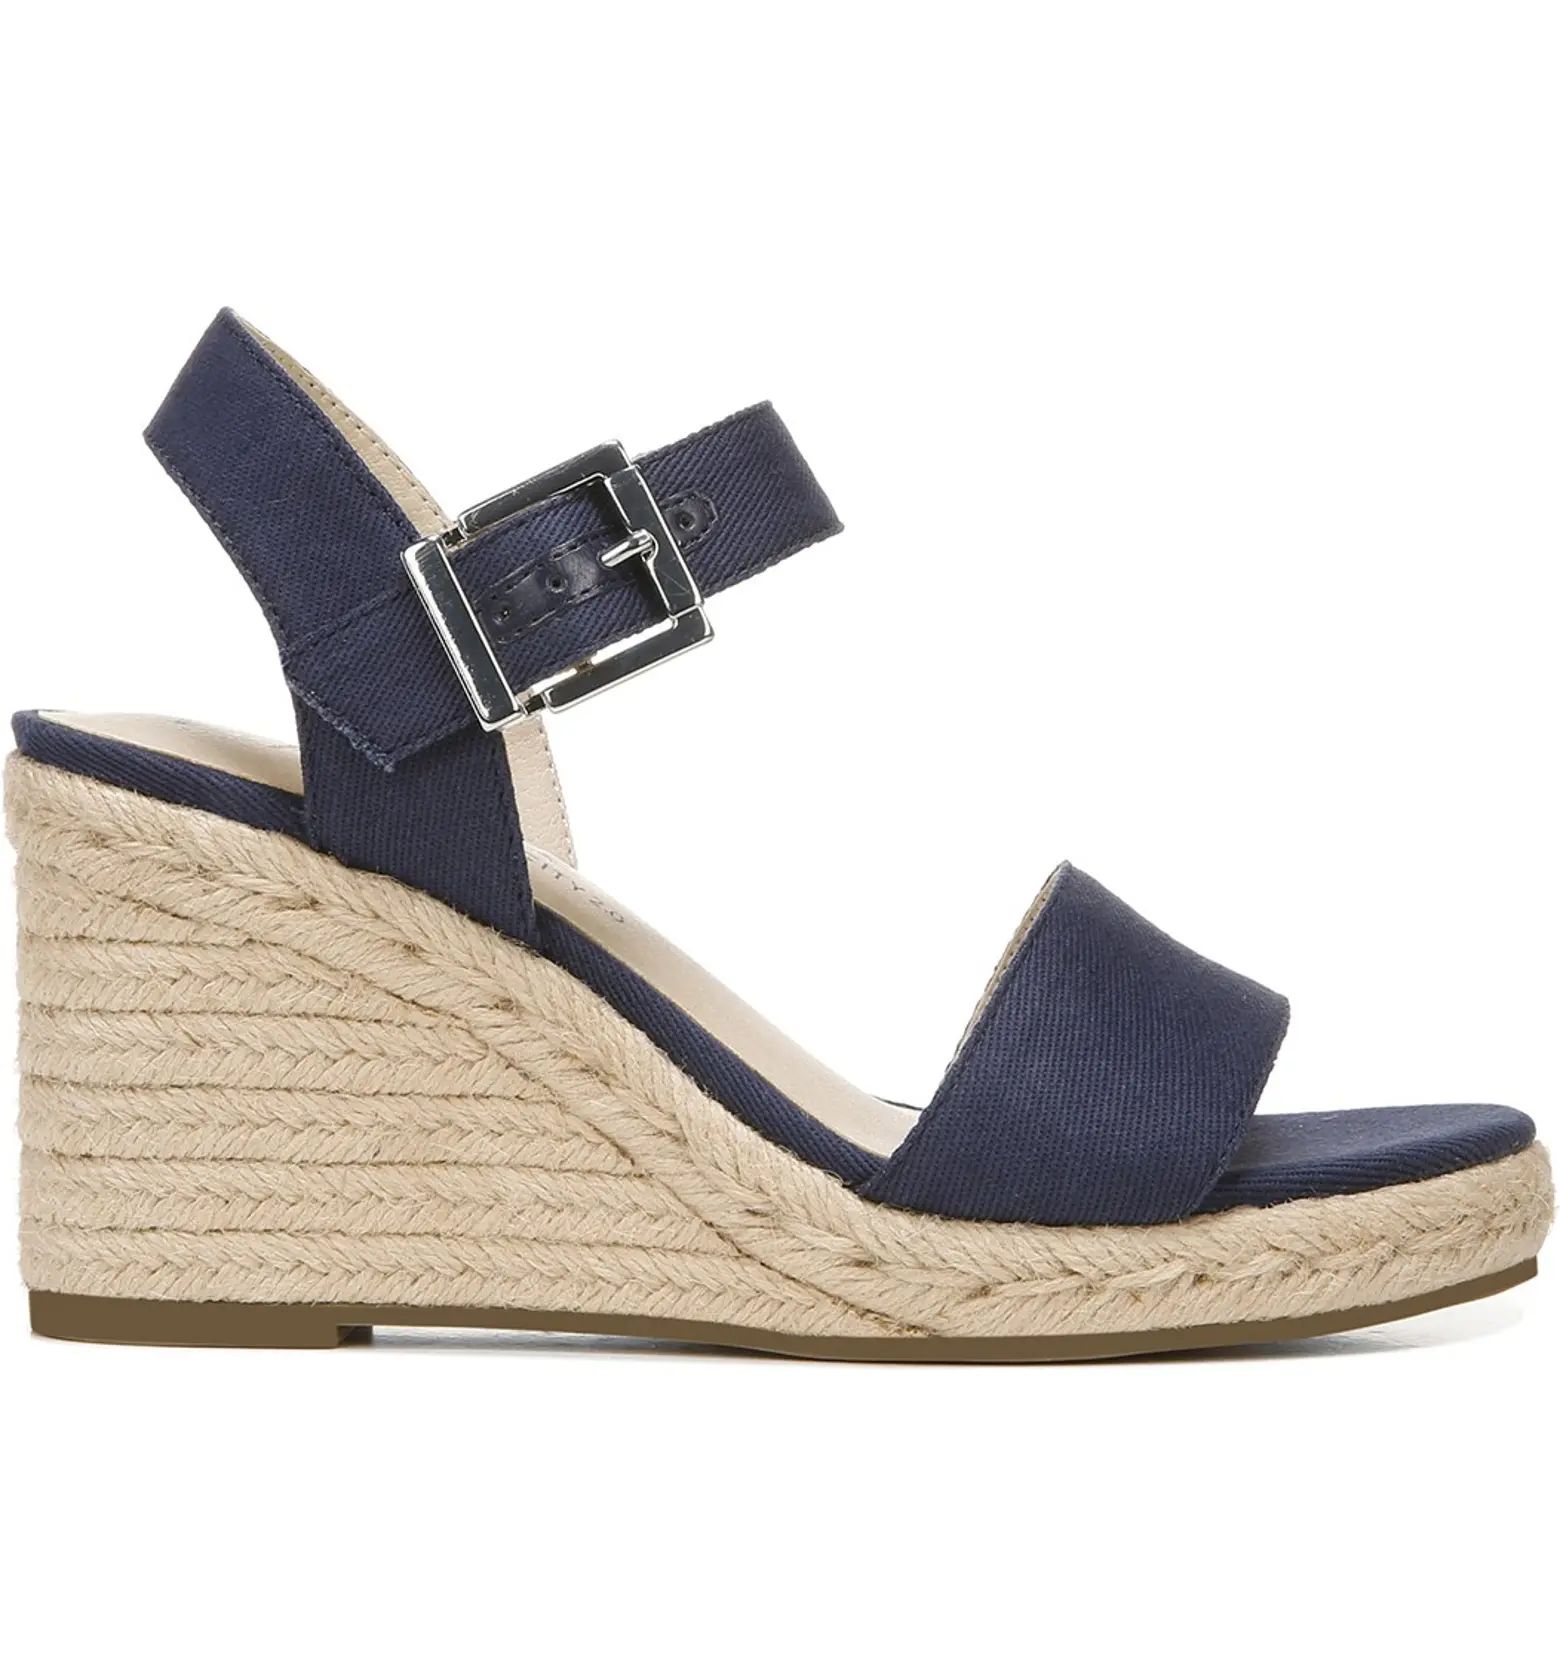 SHOES Tango Wedge Sandal | Nordstrom